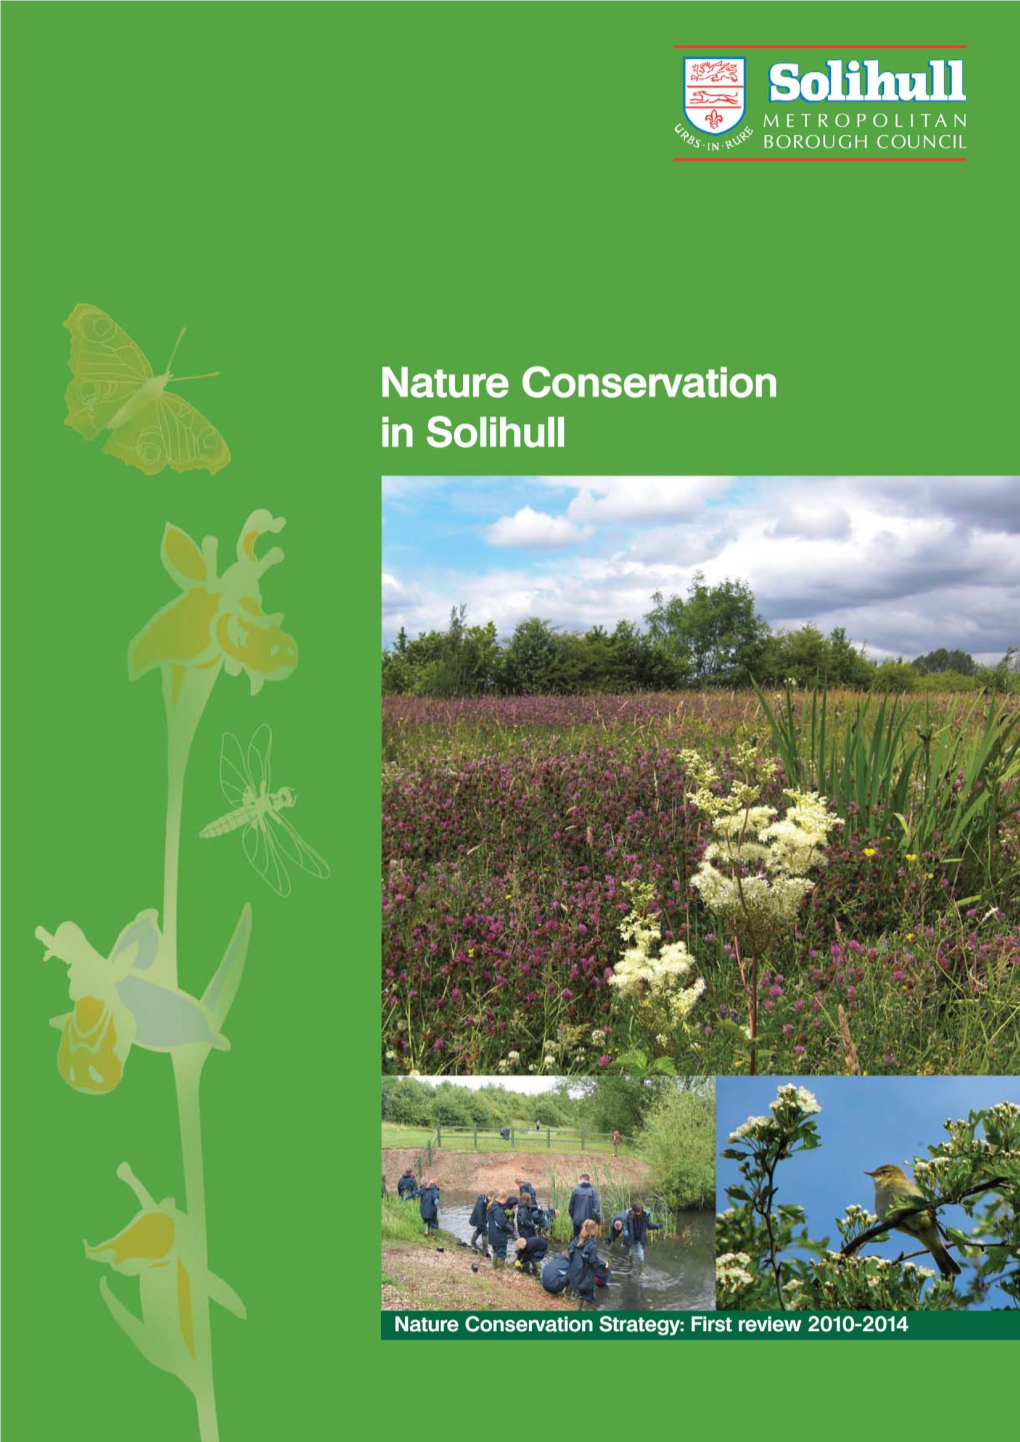 Nature Conservation Strategy 2010 - 2014